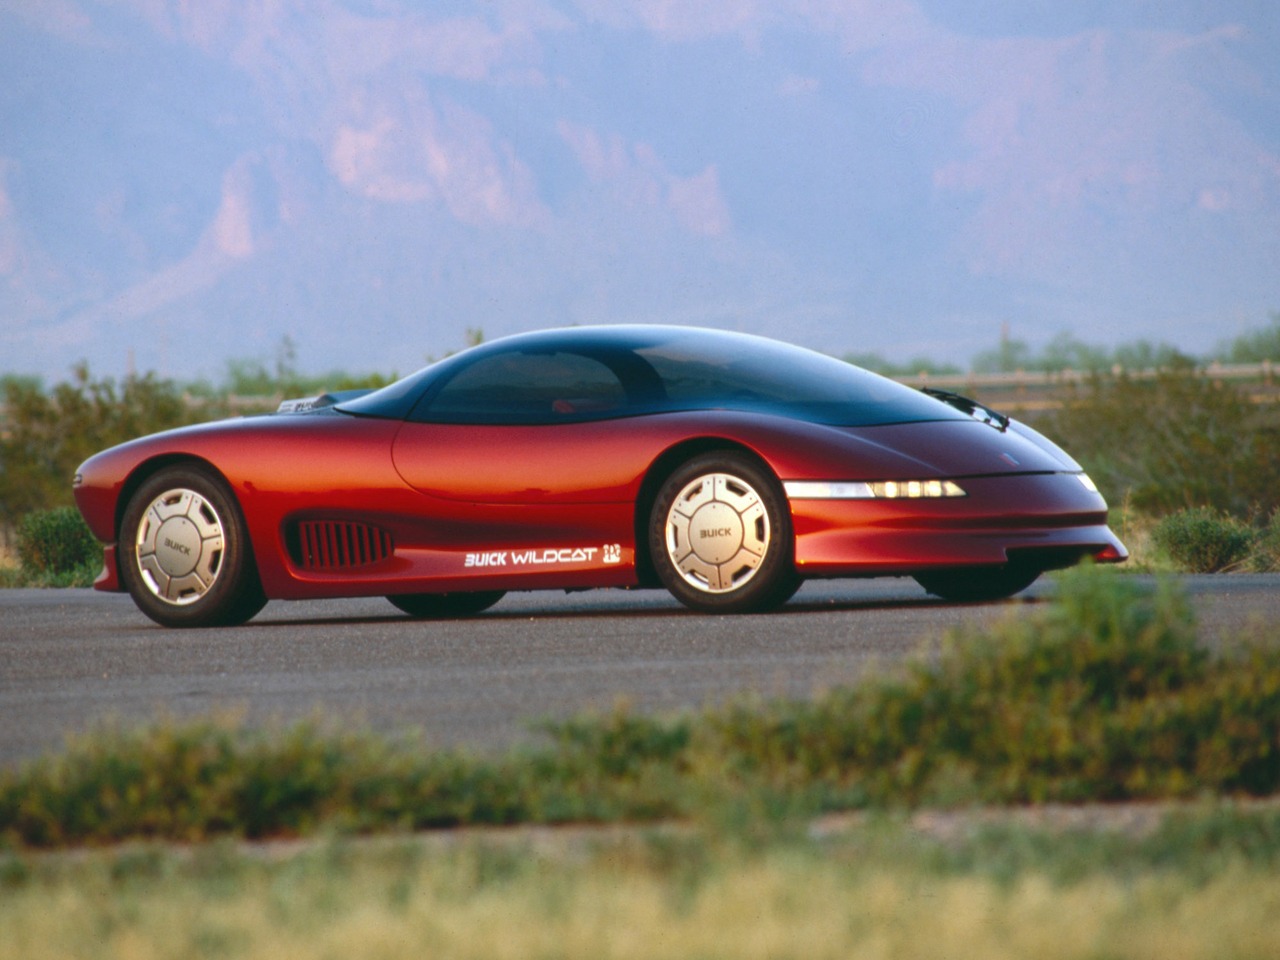 Buick WildCat (1985) - Old Concept Cars